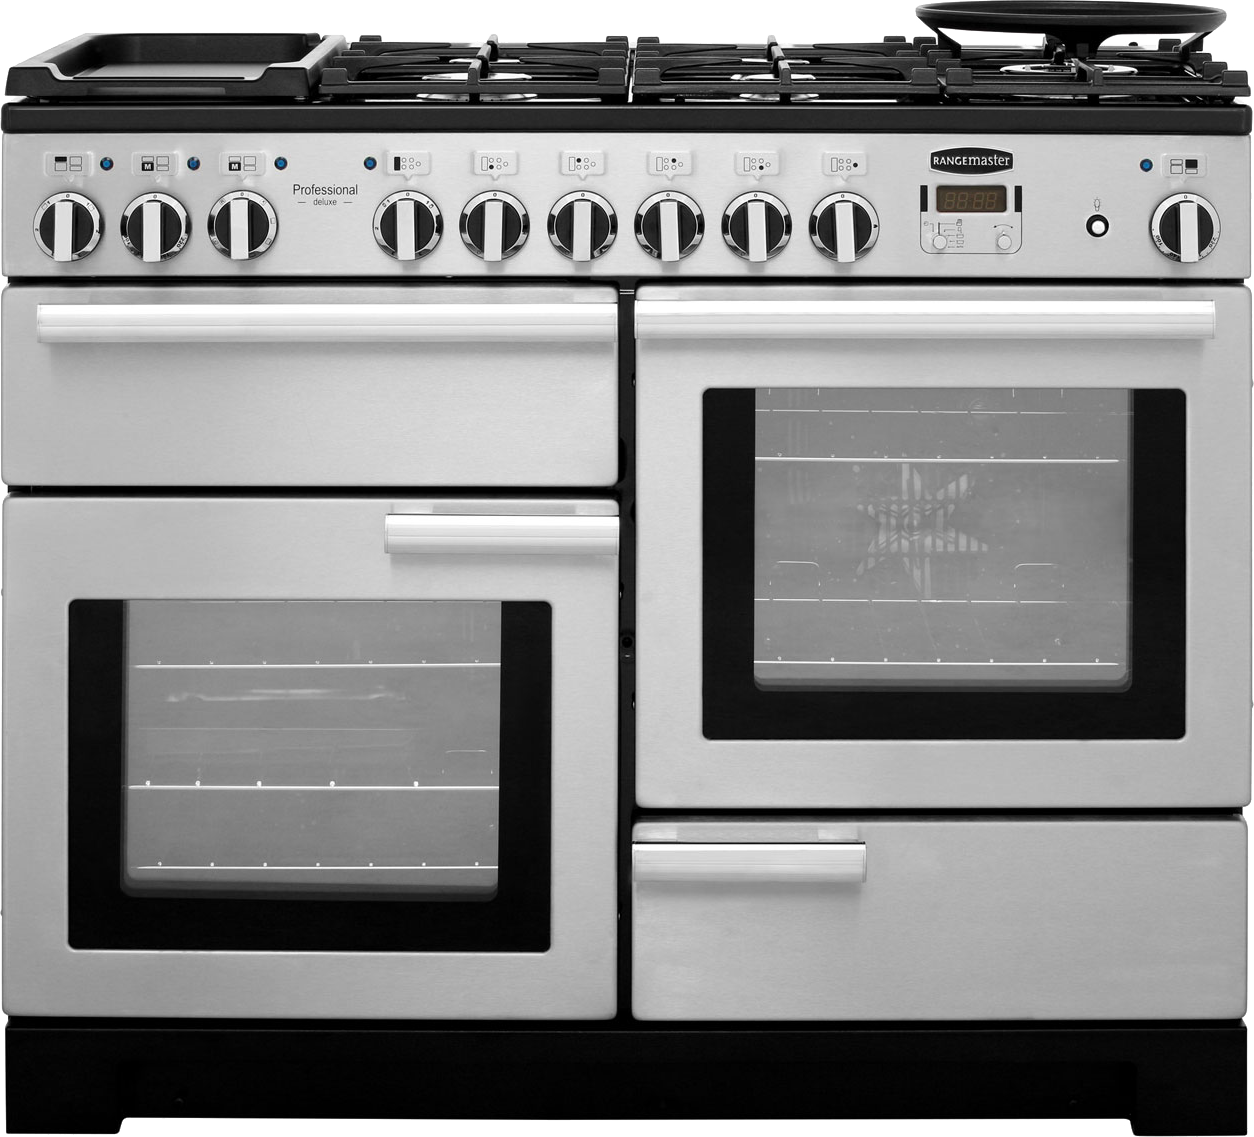 Rangemaster Professional Deluxe PDL110DFFSS/C 110cm Dual Fuel Range Cooker - Stainless Steel - A/A Rated, Stainless Steel